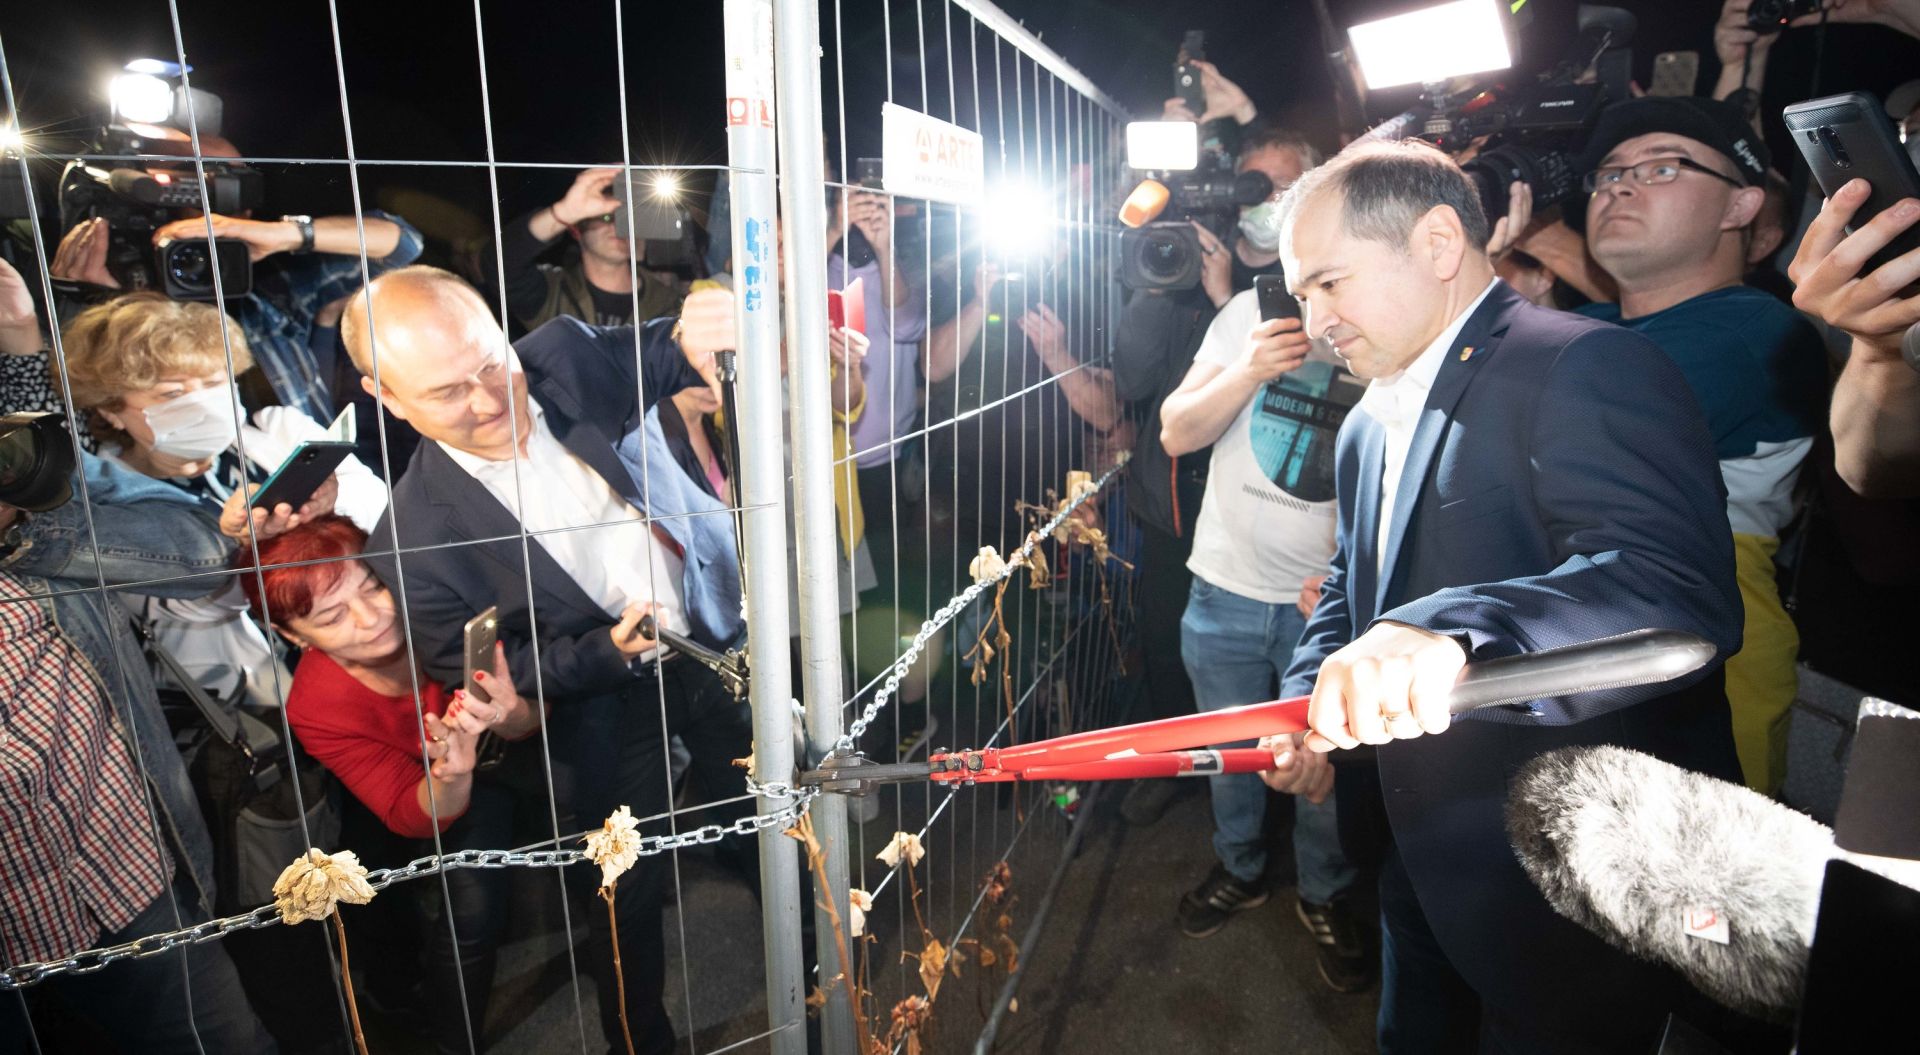 12 June 2020, Saxony, Goerlitz: Octavian Ursu (R), Lord Mayor of Goerlitz in Germany, and Rafal Gronicz (L), Mayor of Zgorzelec in Poland, together open the border fence on the Goerlitz Old Town Bridge. After almost three months, Poland has reopened its borders with all EU neighbouring countries on Saturday night. Photo: Daniel Schäfer/dpa-Zentralbild/dpa